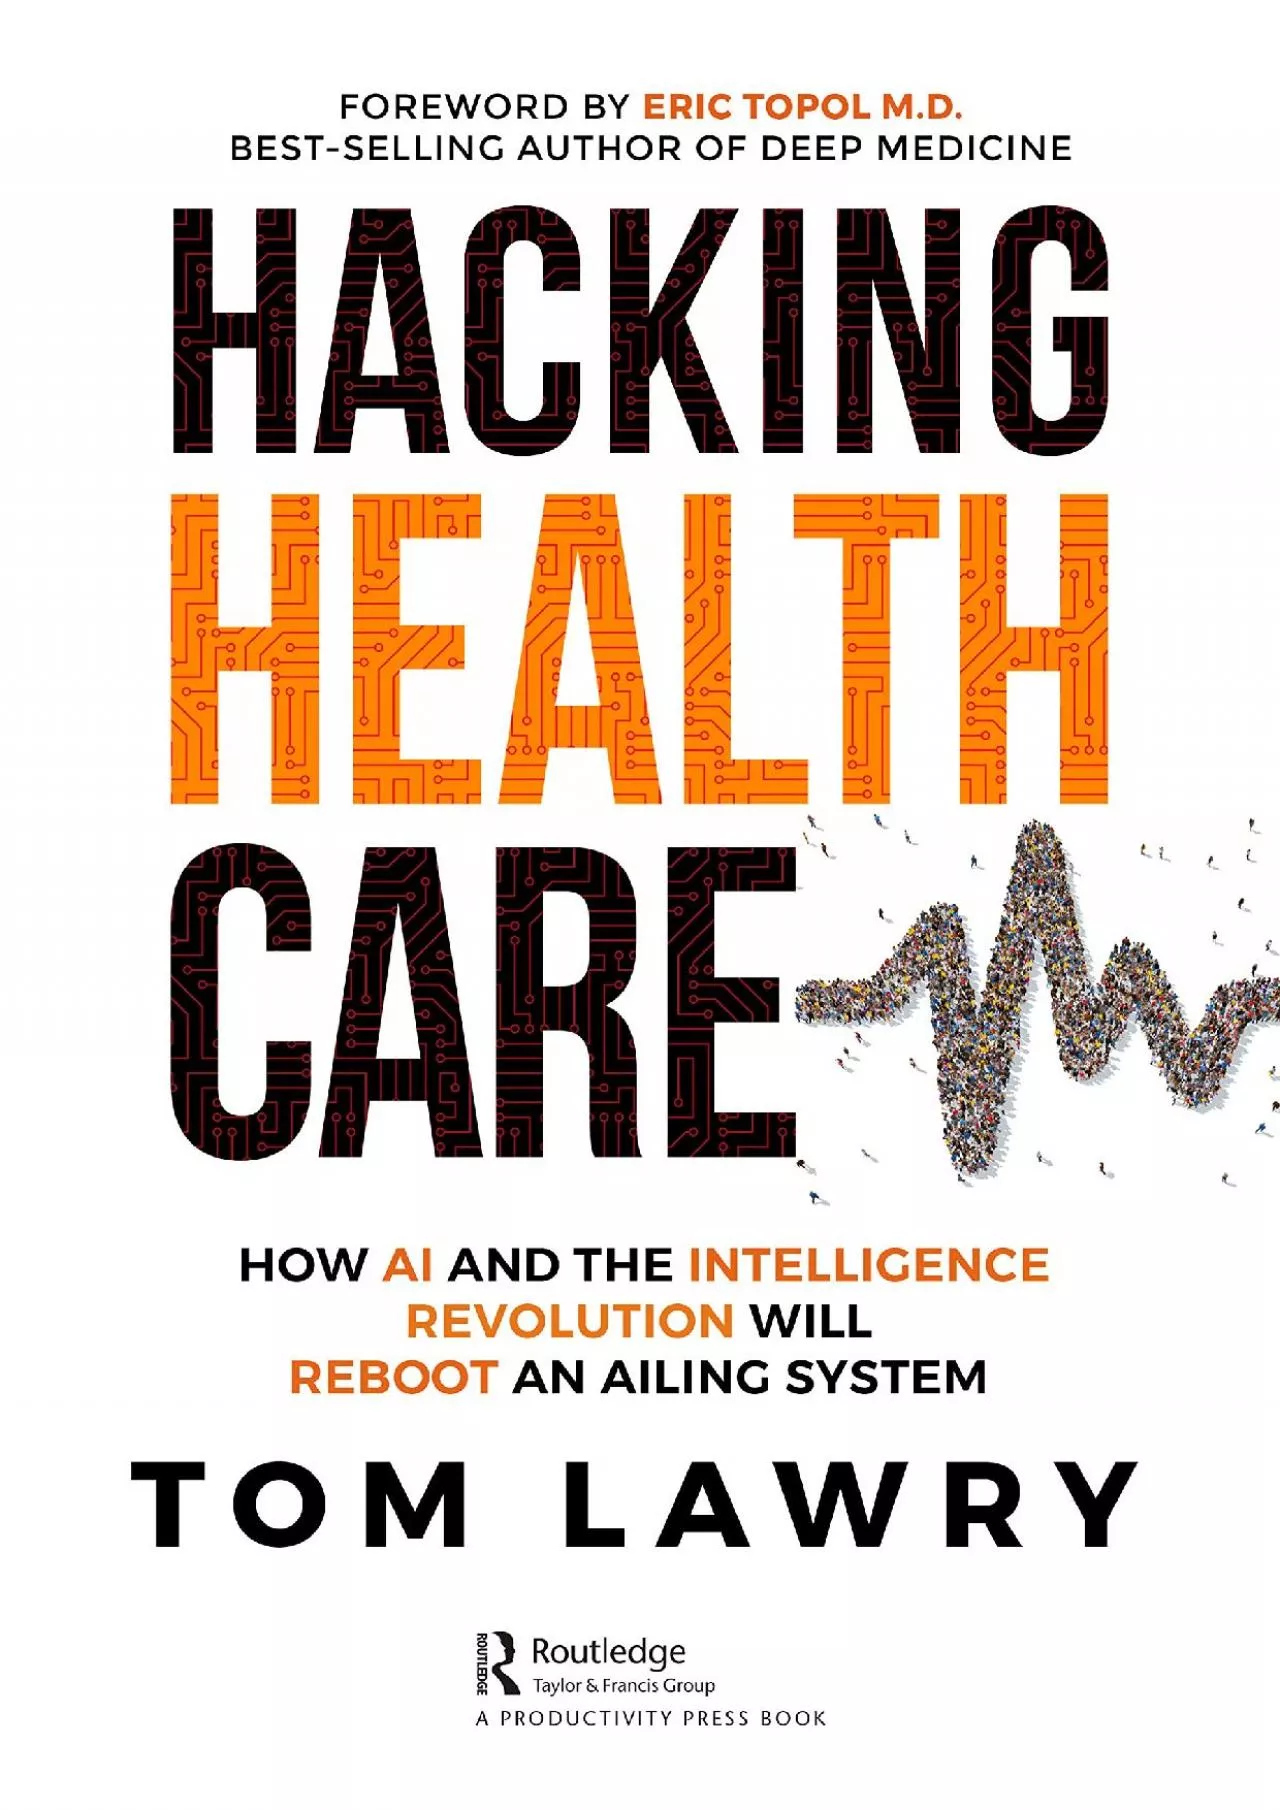 (EBOOK)-Hacking Healthcare: How AI and the Intelligence Revolution Will Reboot an Ailing